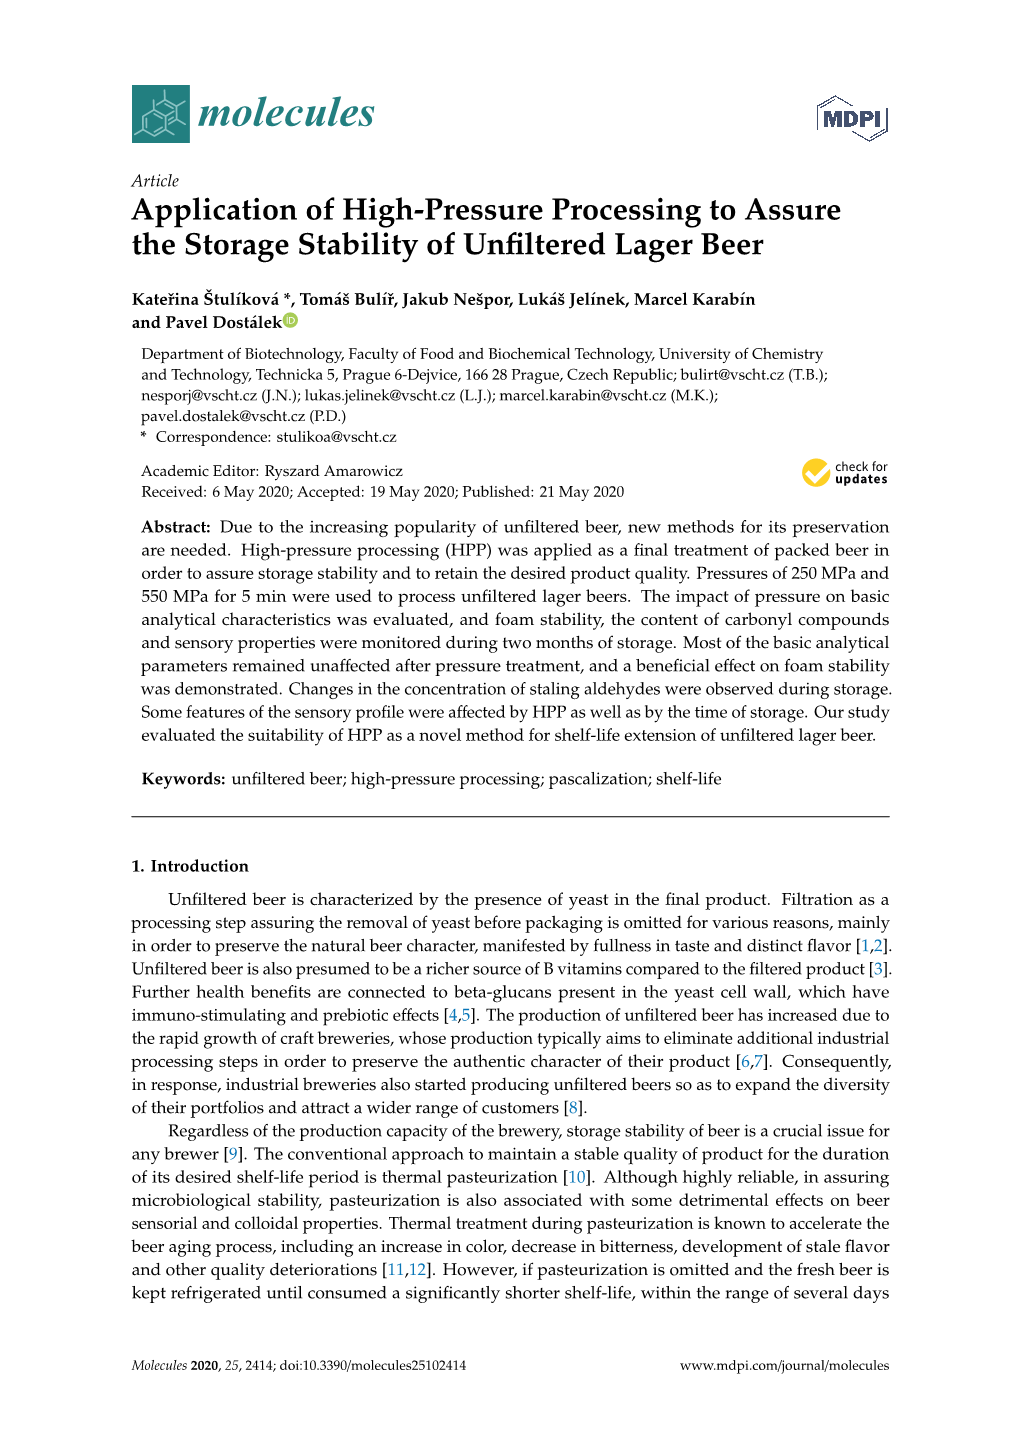 Application of High-Pressure Processing to Assure the Storage Stability of Unﬁltered Lager Beer